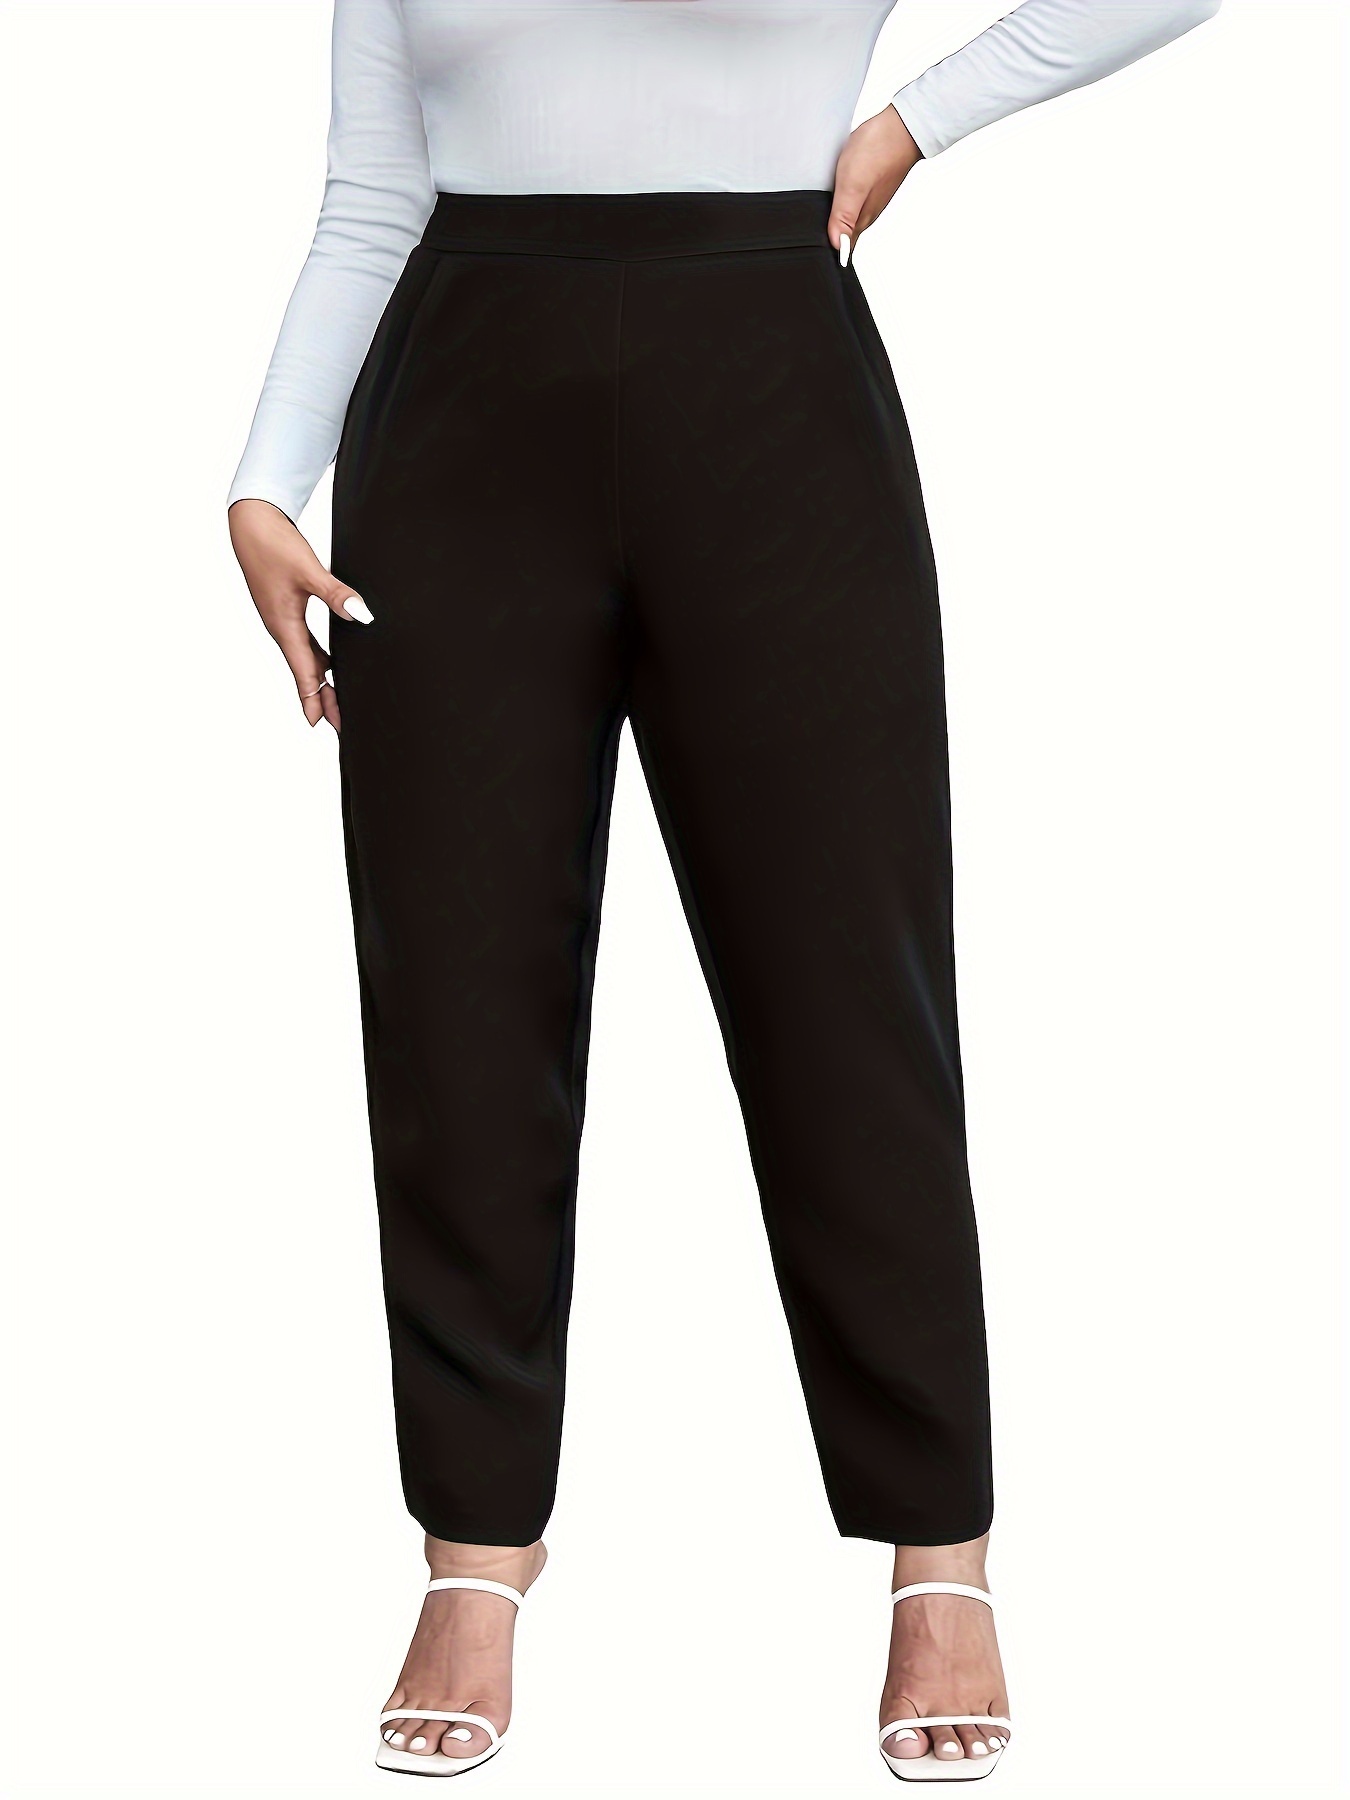 Soft Surroundings Solid Black Casual Pants Size S - 78% off